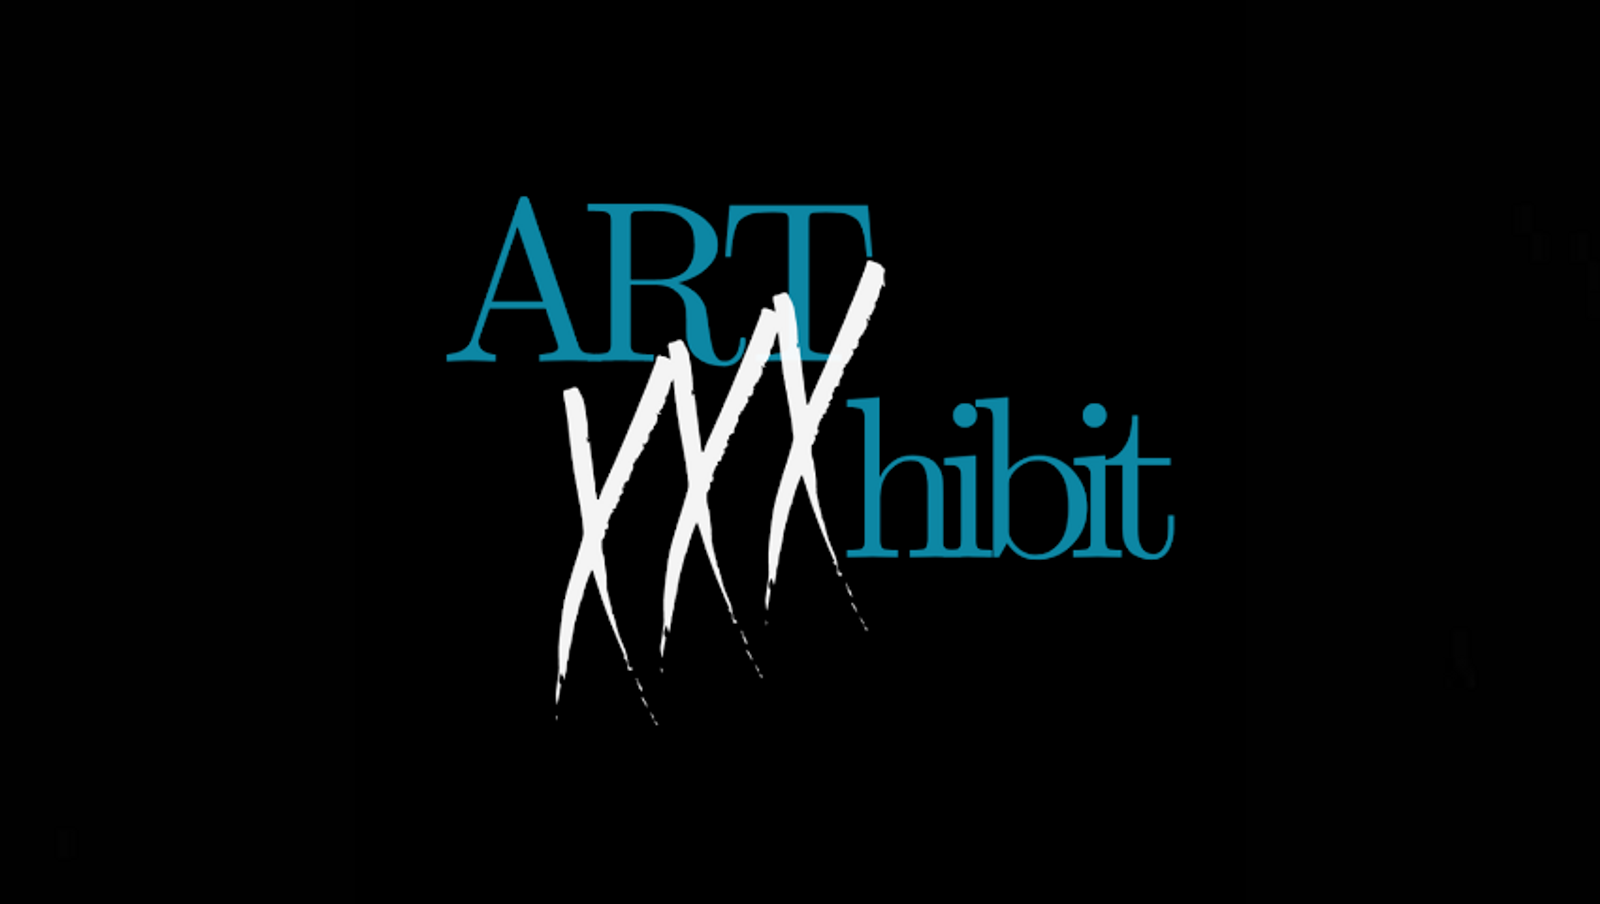 Sexual Essentials to Unveil Adults-Only ‘Art XXXhibit’